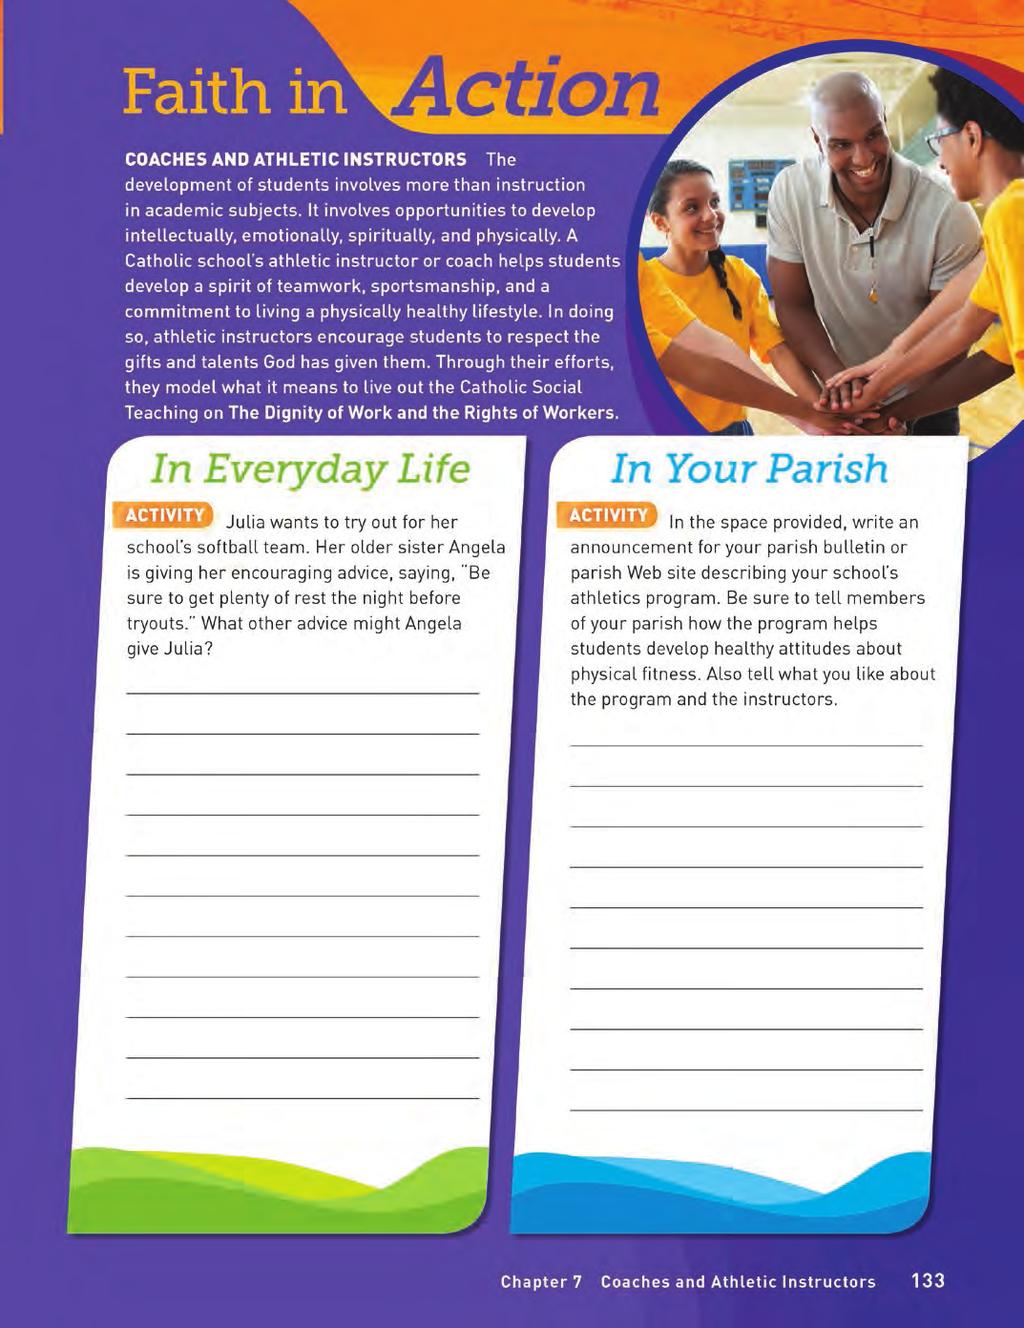 Grade 6 Faith in Action Page FAITH IN ACTION PAGES Each chapter includes a Faith in Action page that highlights a parish or school